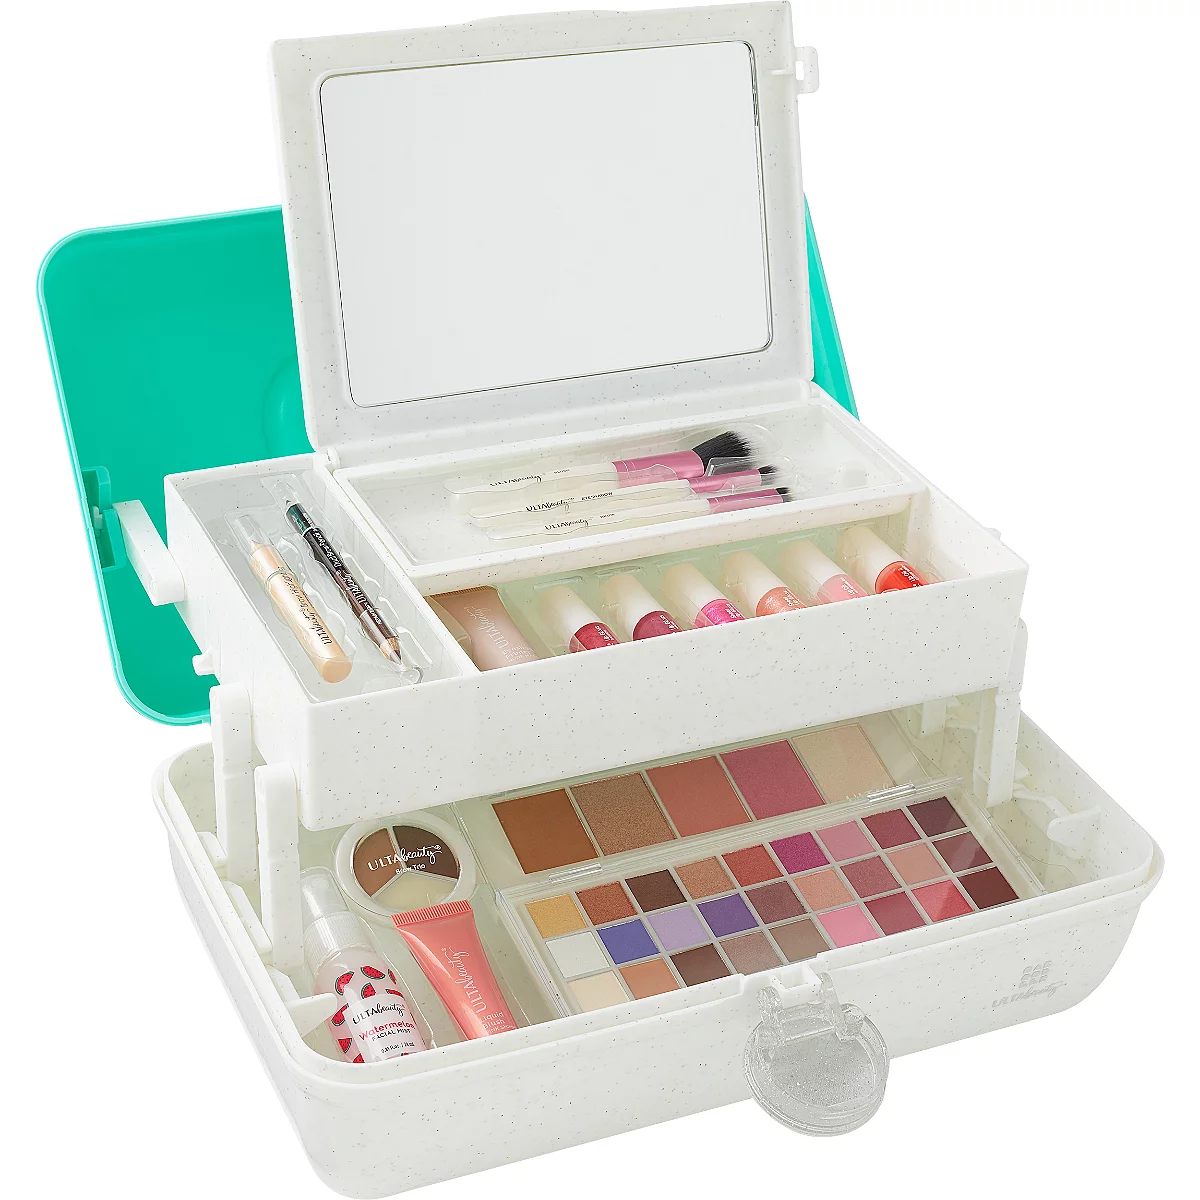 kit and caboodle makeup case